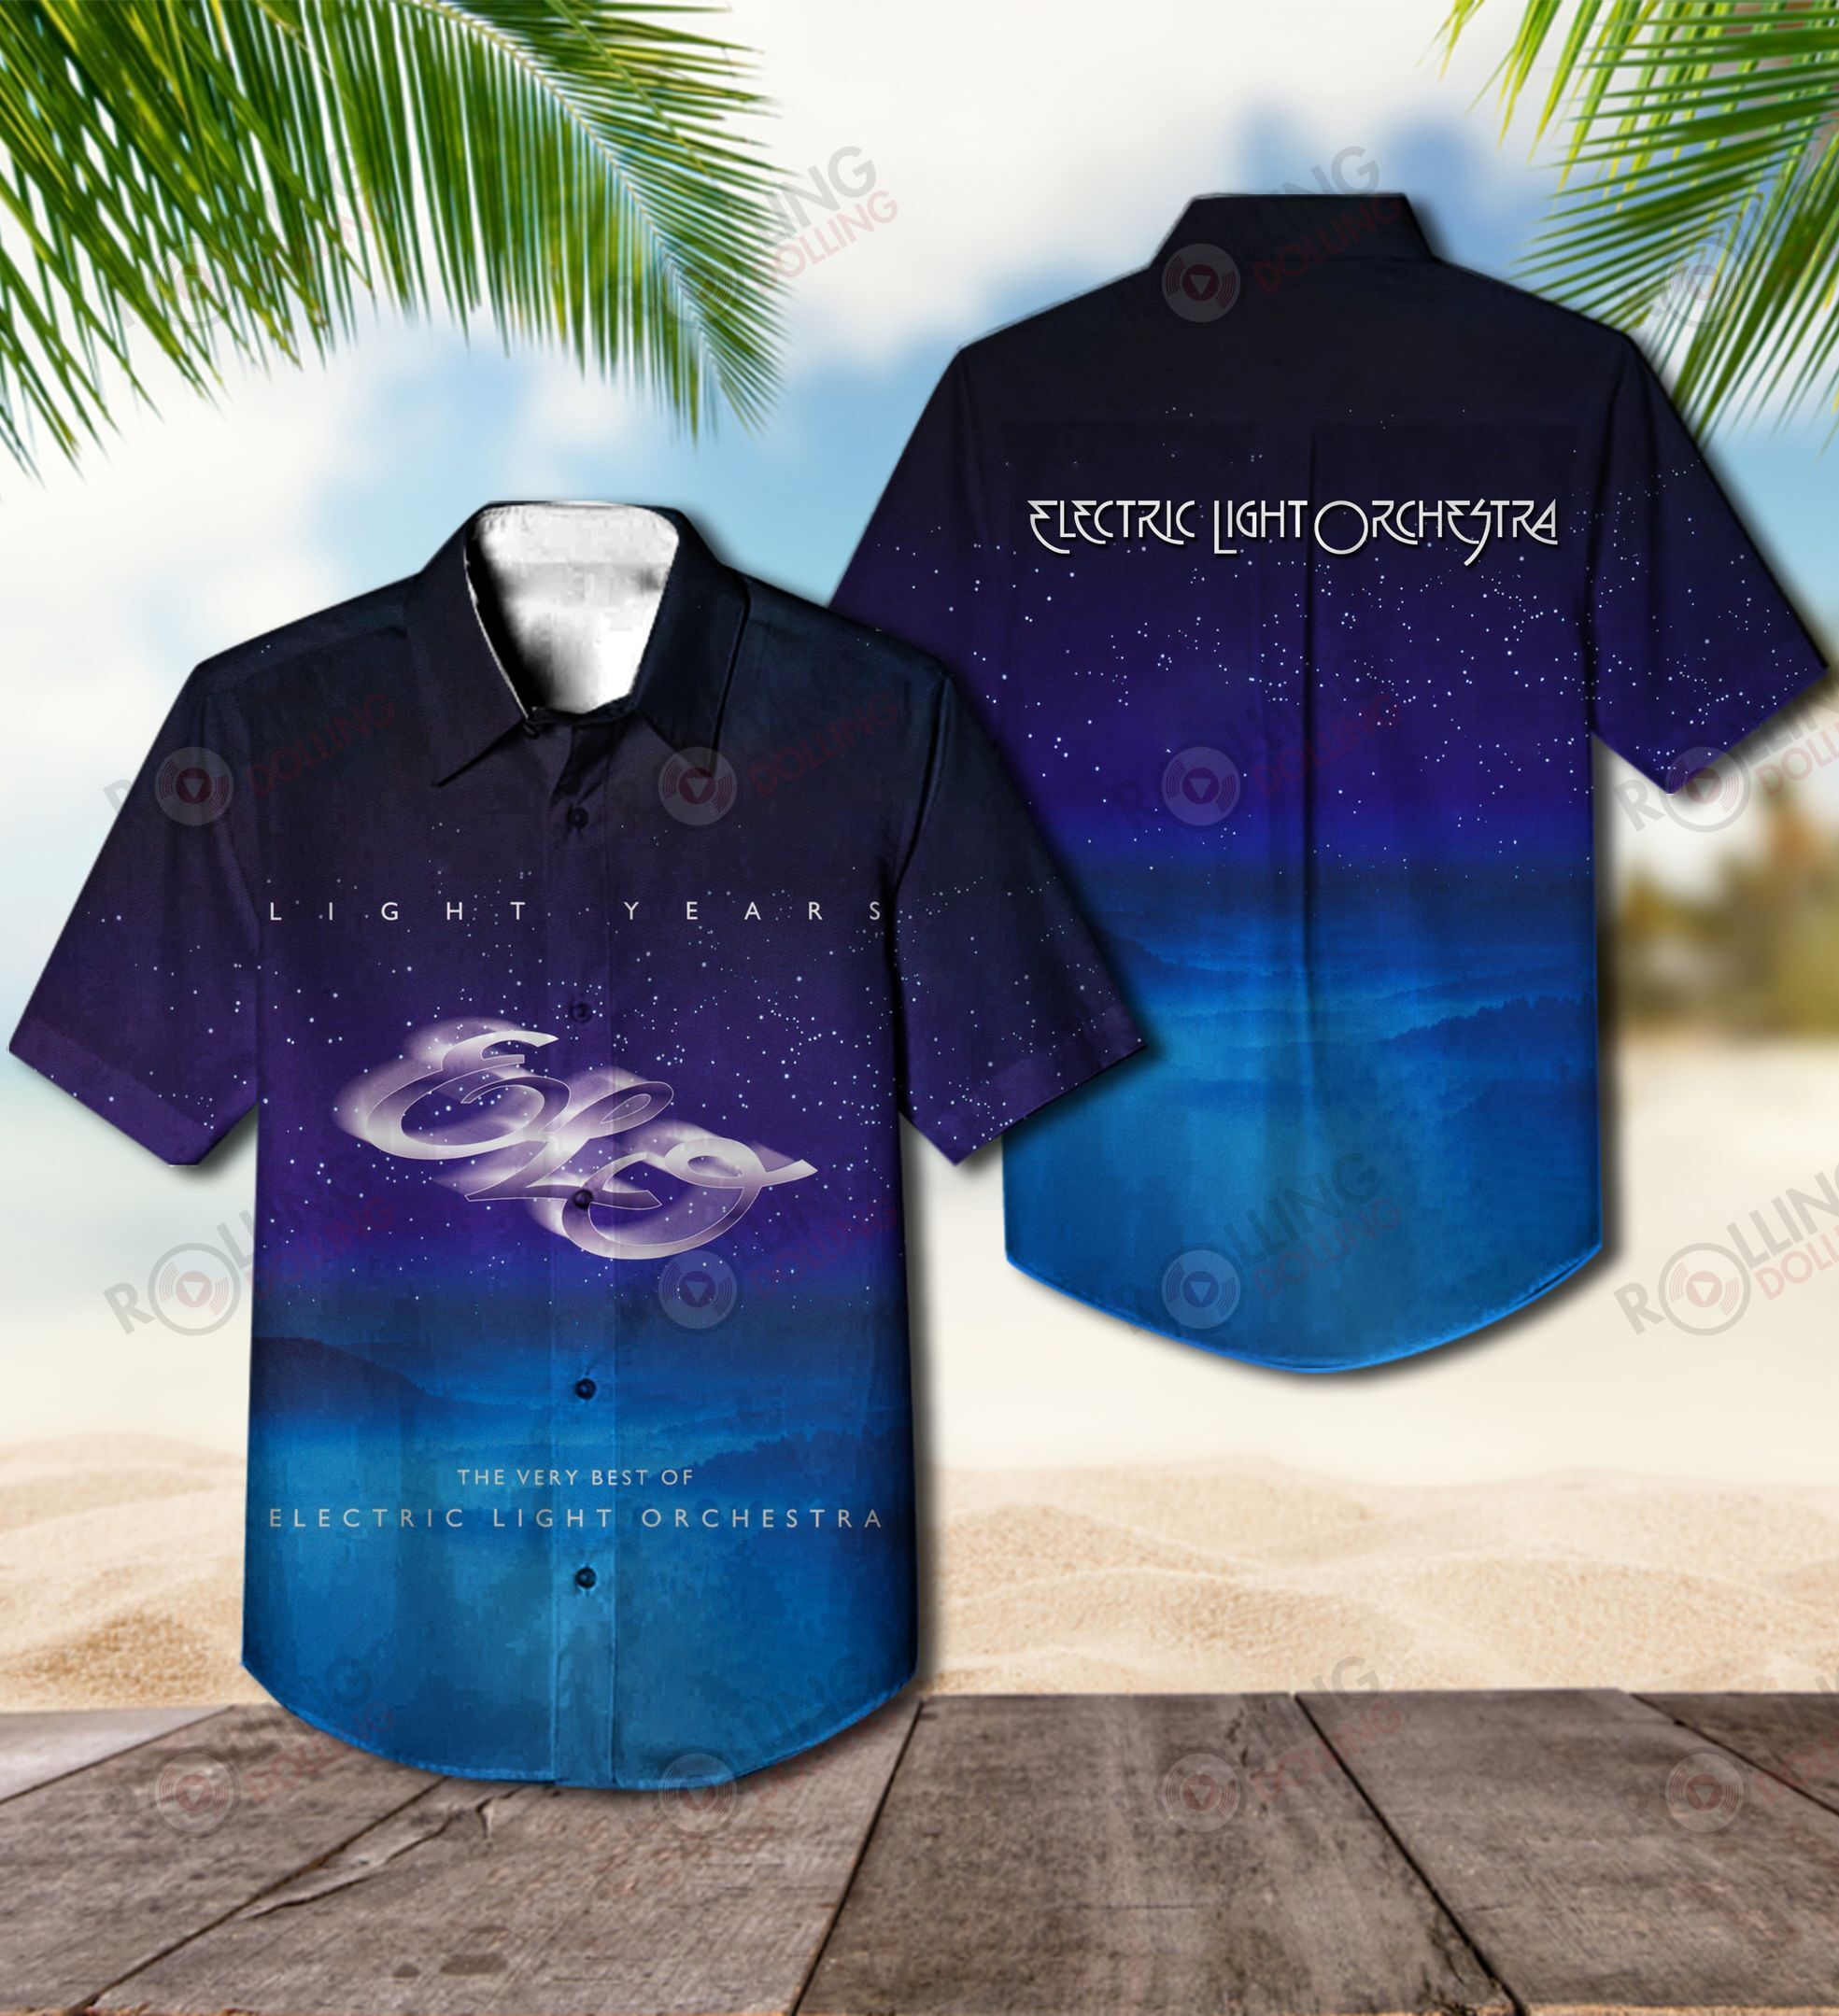 This would make a great gift for any fan who loves Hawaiian Shirt as well as Rock band 131